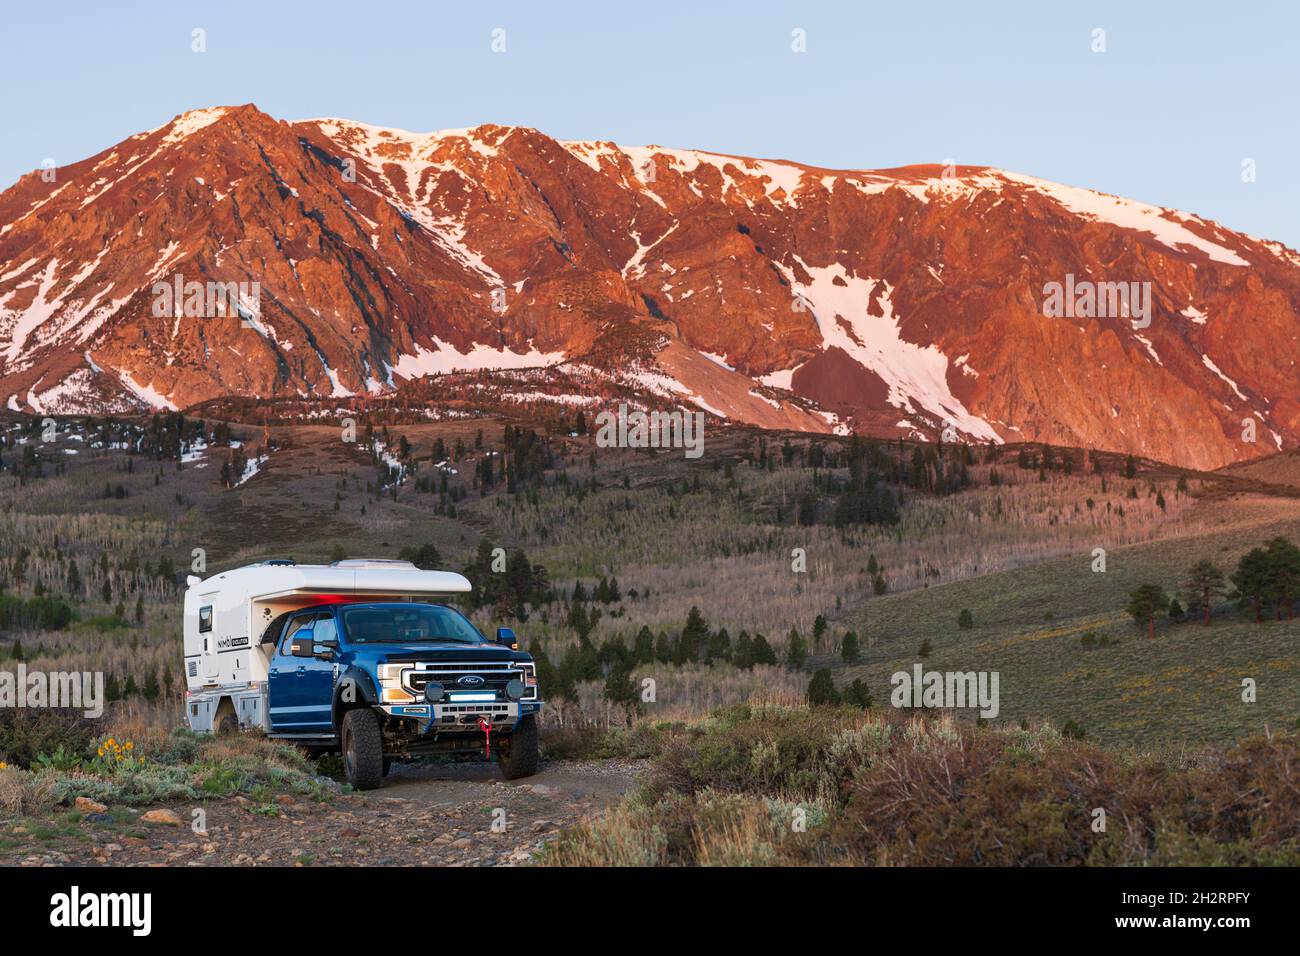 High end Overlanding off road vehicle made on a ford F350 Chassis by NIMBL vehicle company out of Auburn California, North America Stock Photo